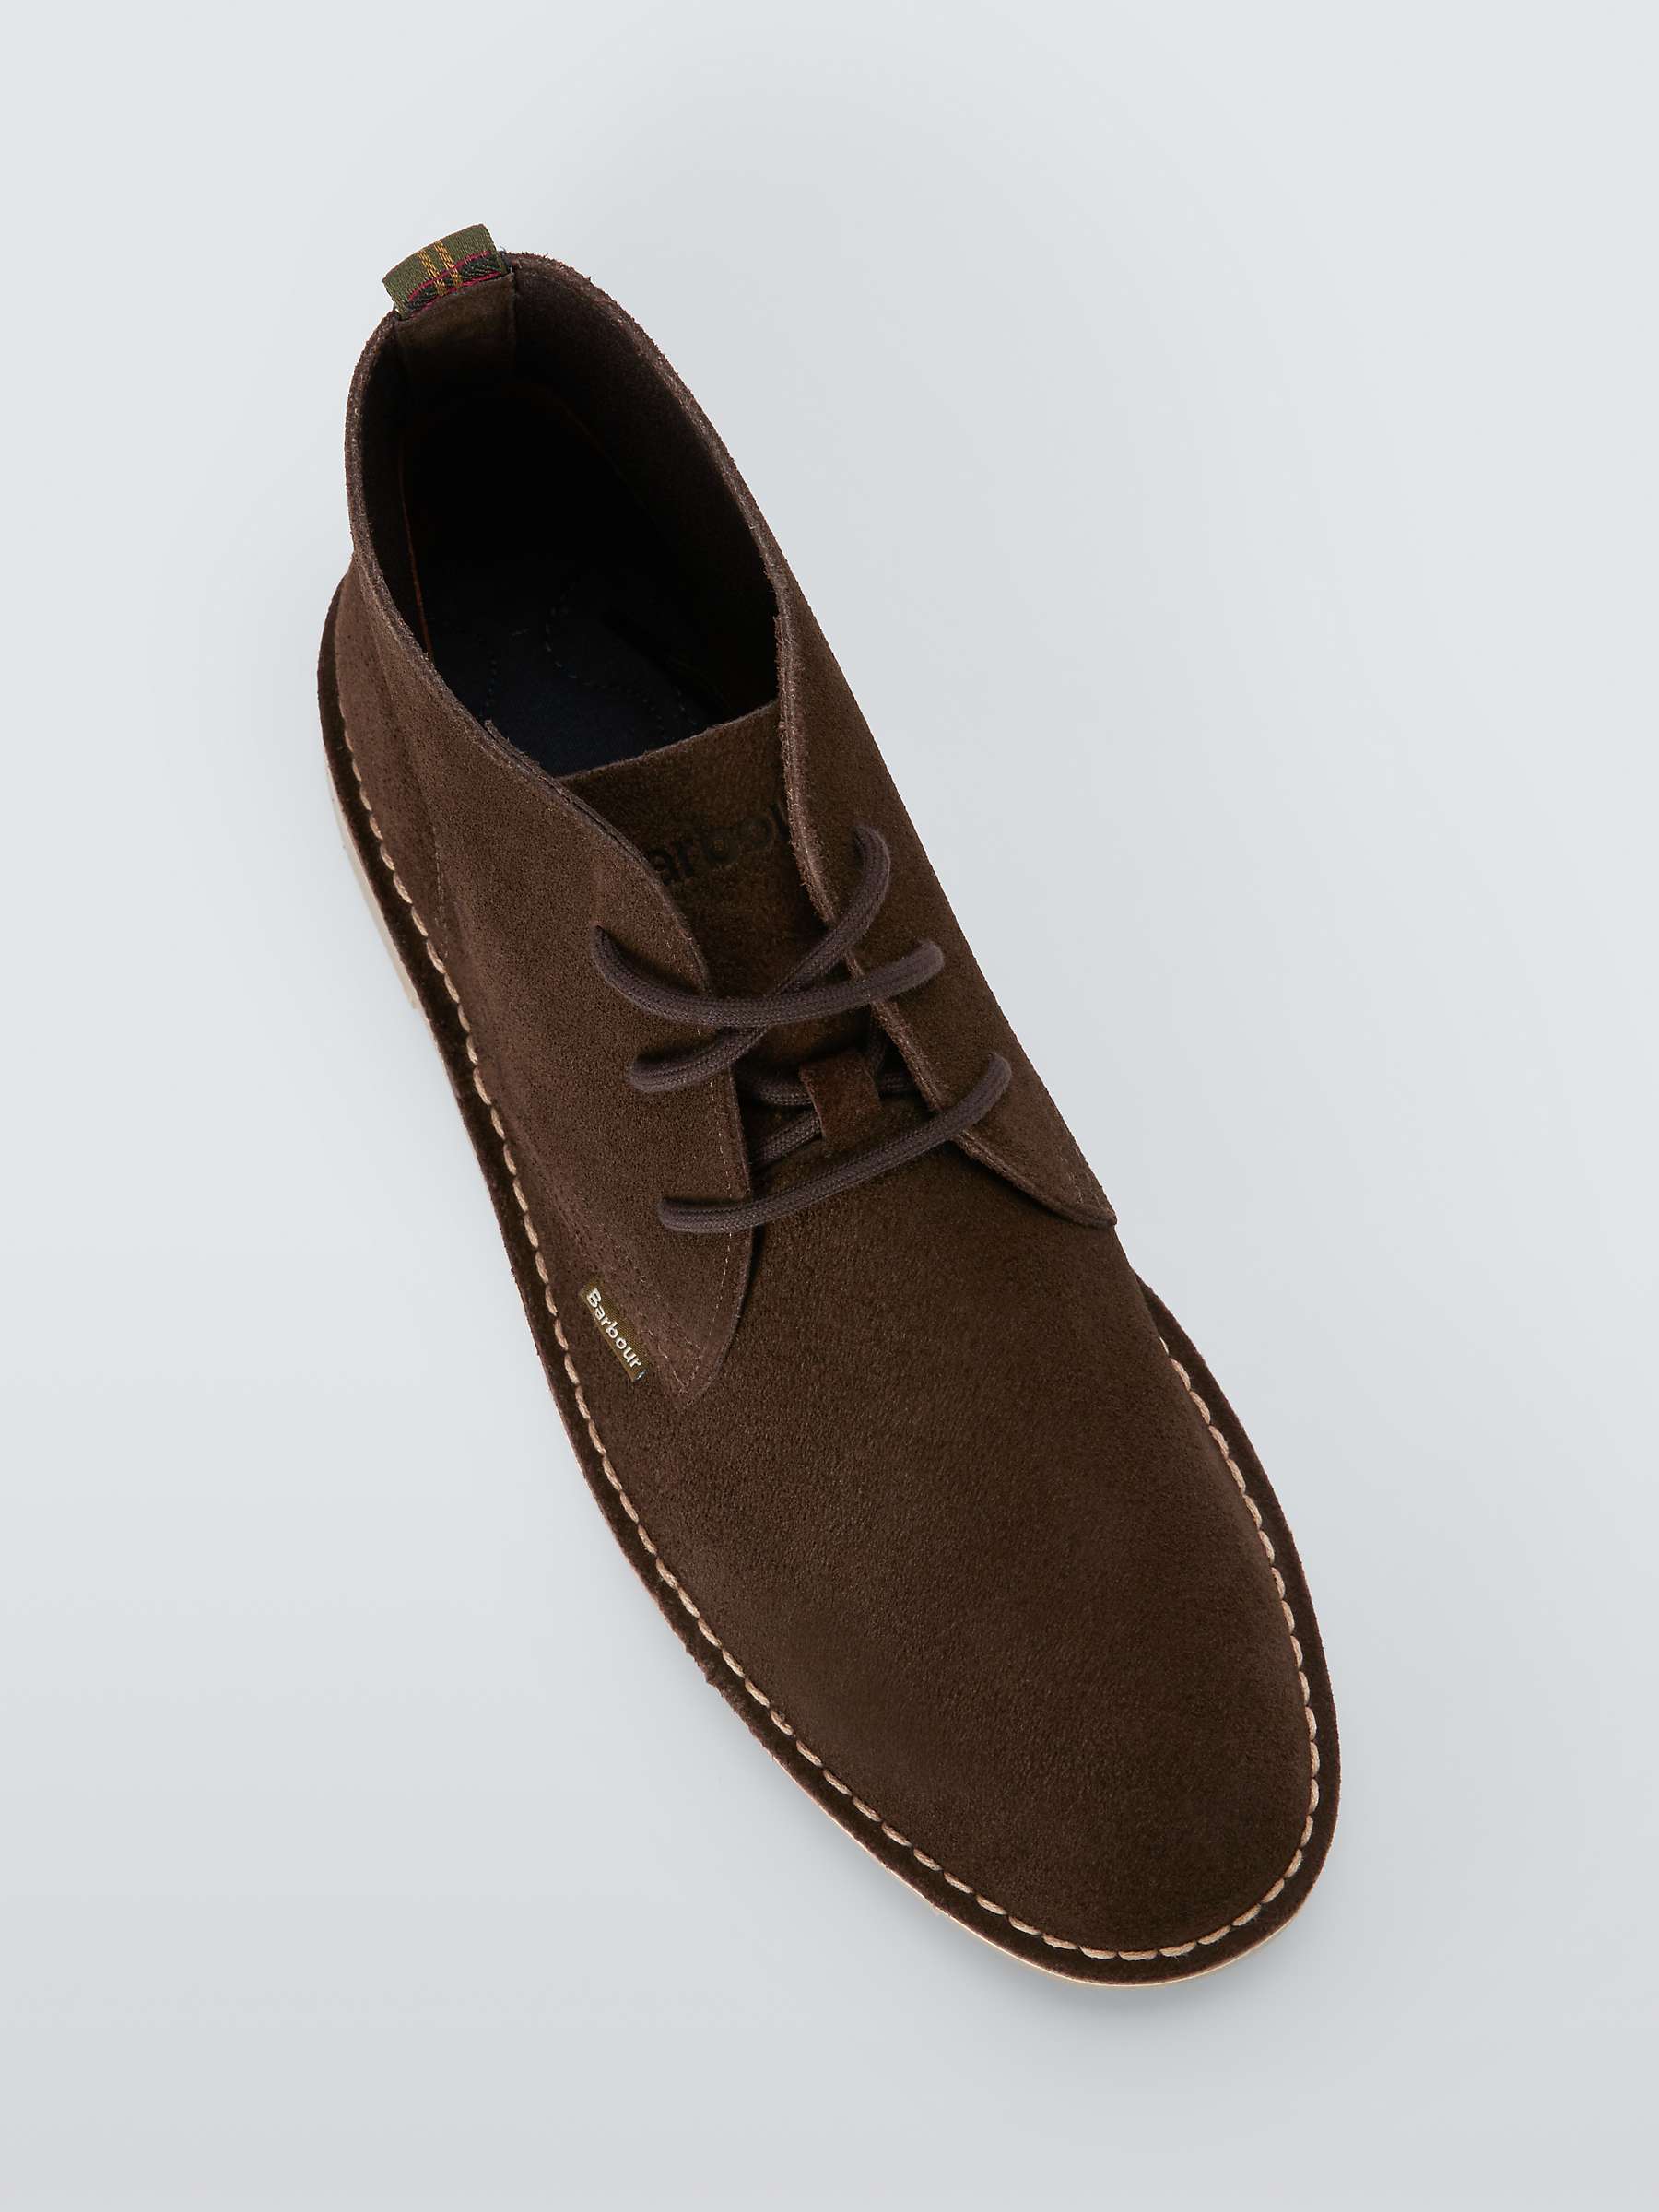 Buy Barbour Siton Suede Desert Boots Online at johnlewis.com